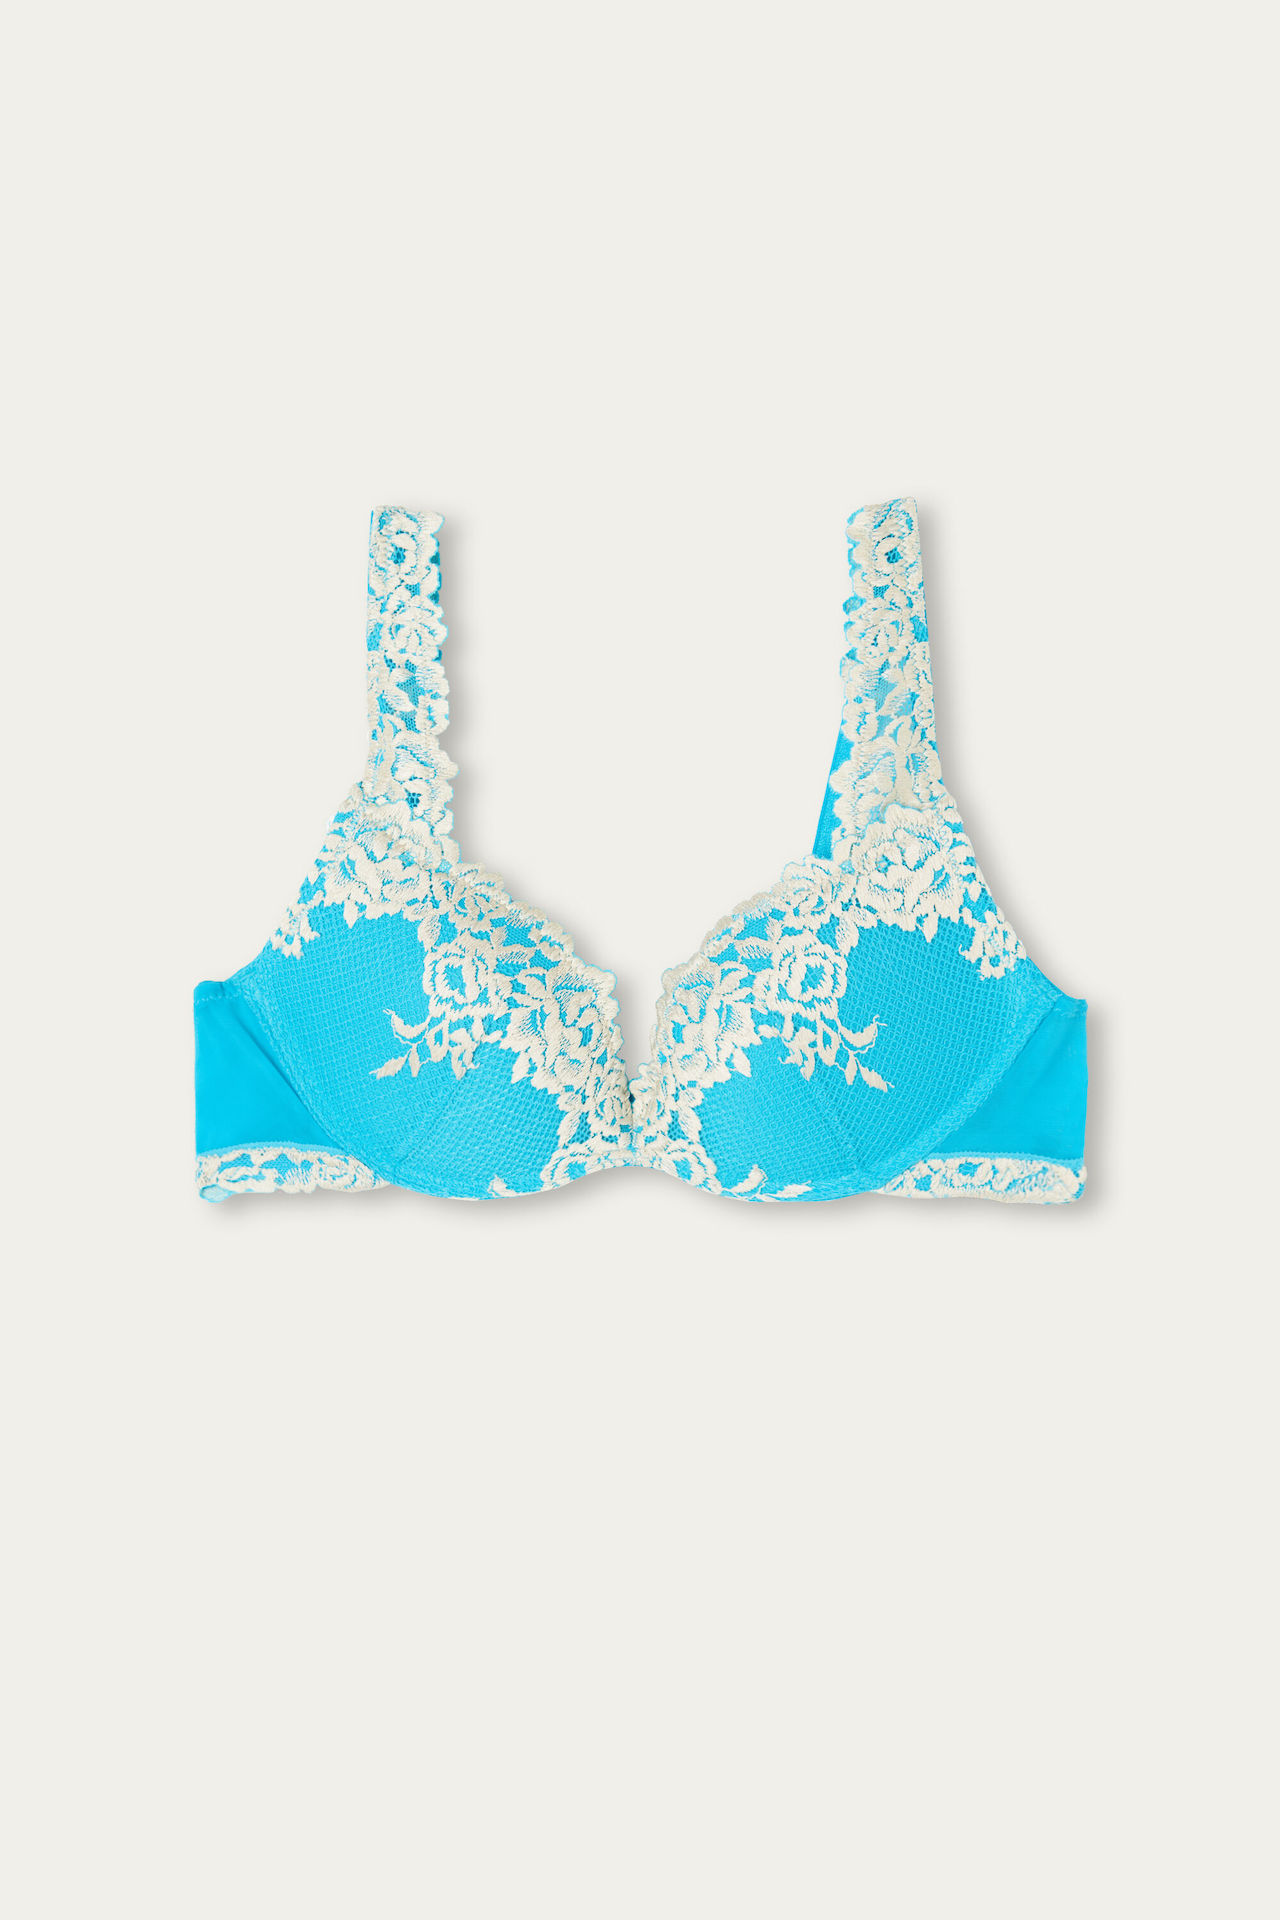 INTIMISSIMI - Elena bra from Summer in Sicily Collection is